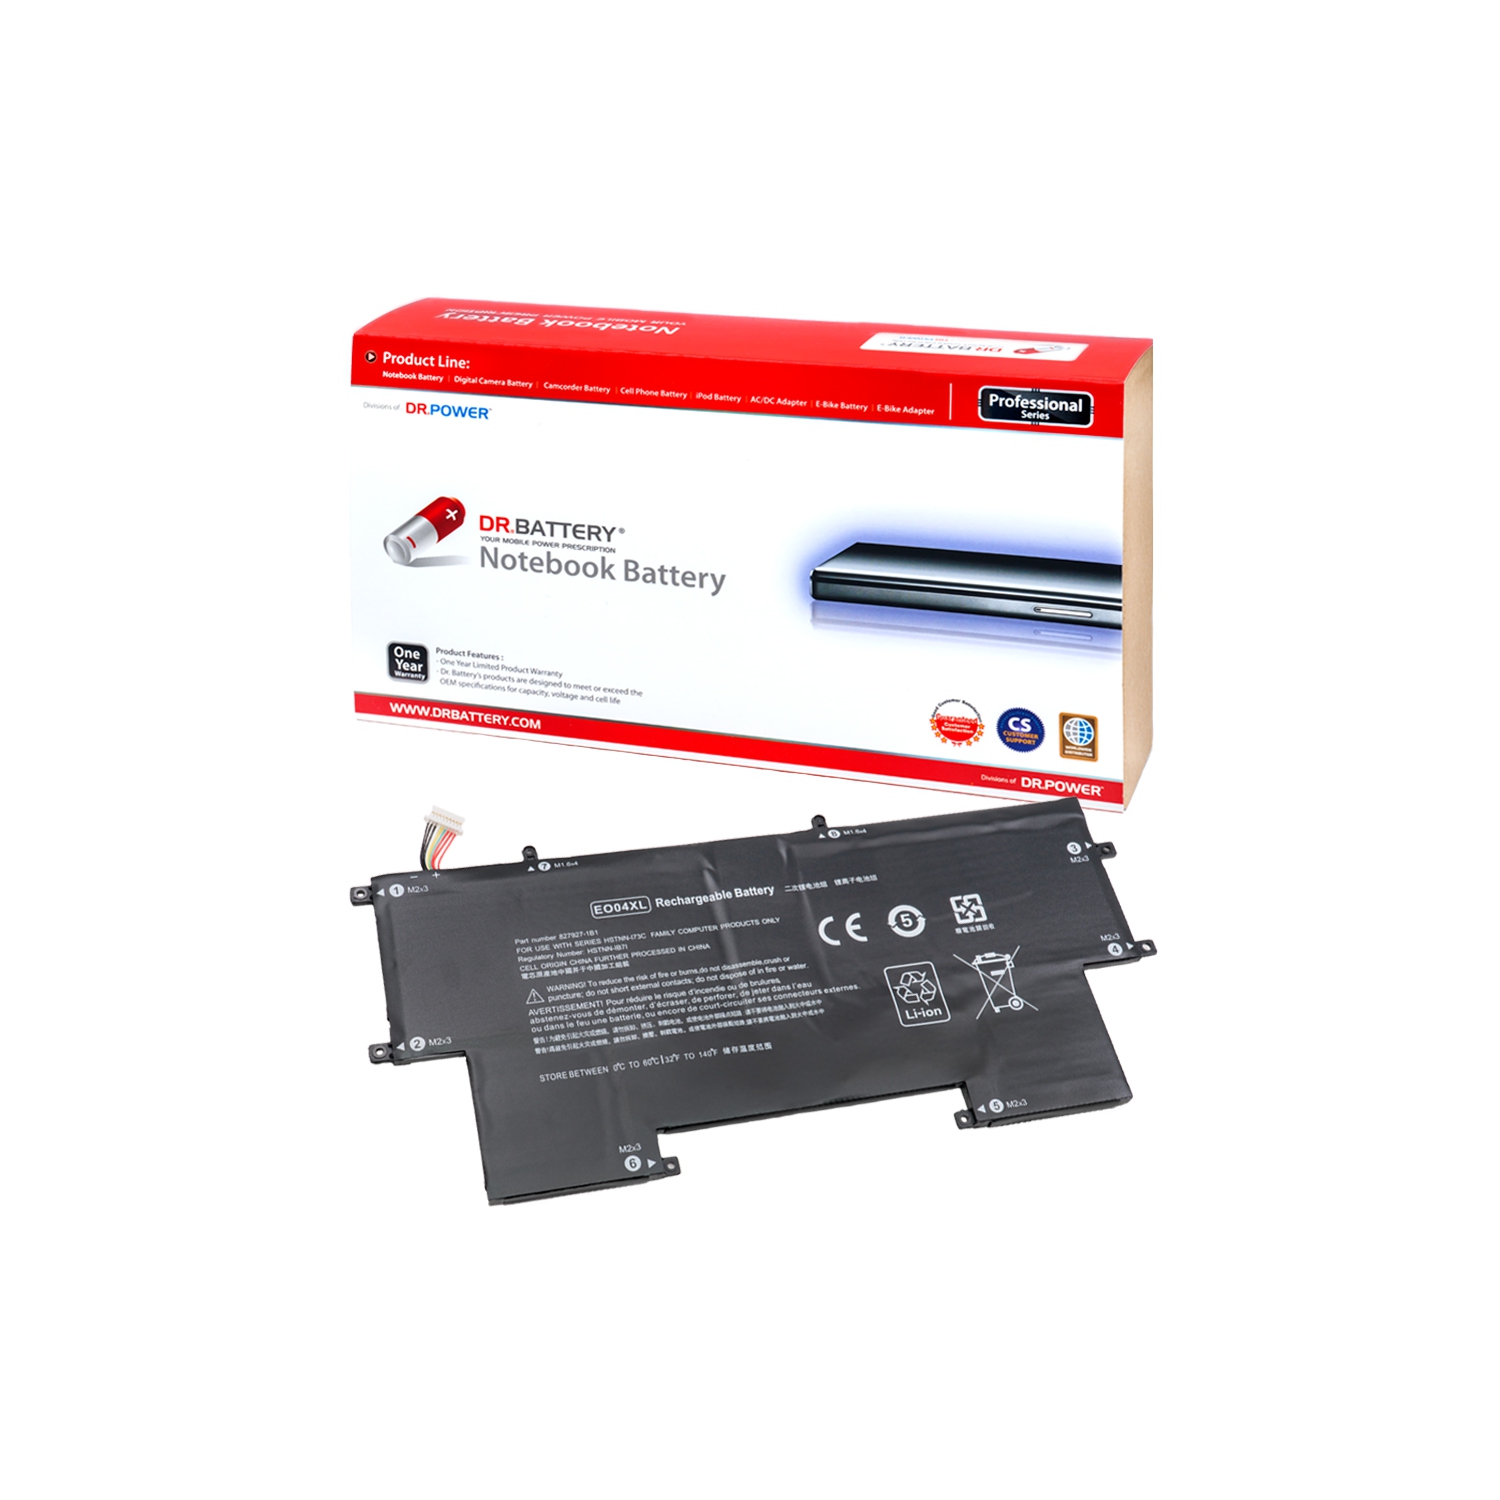 DR. BATTERY Replacement for HP EliteBook Folio G1 V1C36EA V1C37EA V1C39EA V1C40EA 8279271B1 827927-1B1 8279271C1 [7.7V / 32Wh] **Free Shipping**